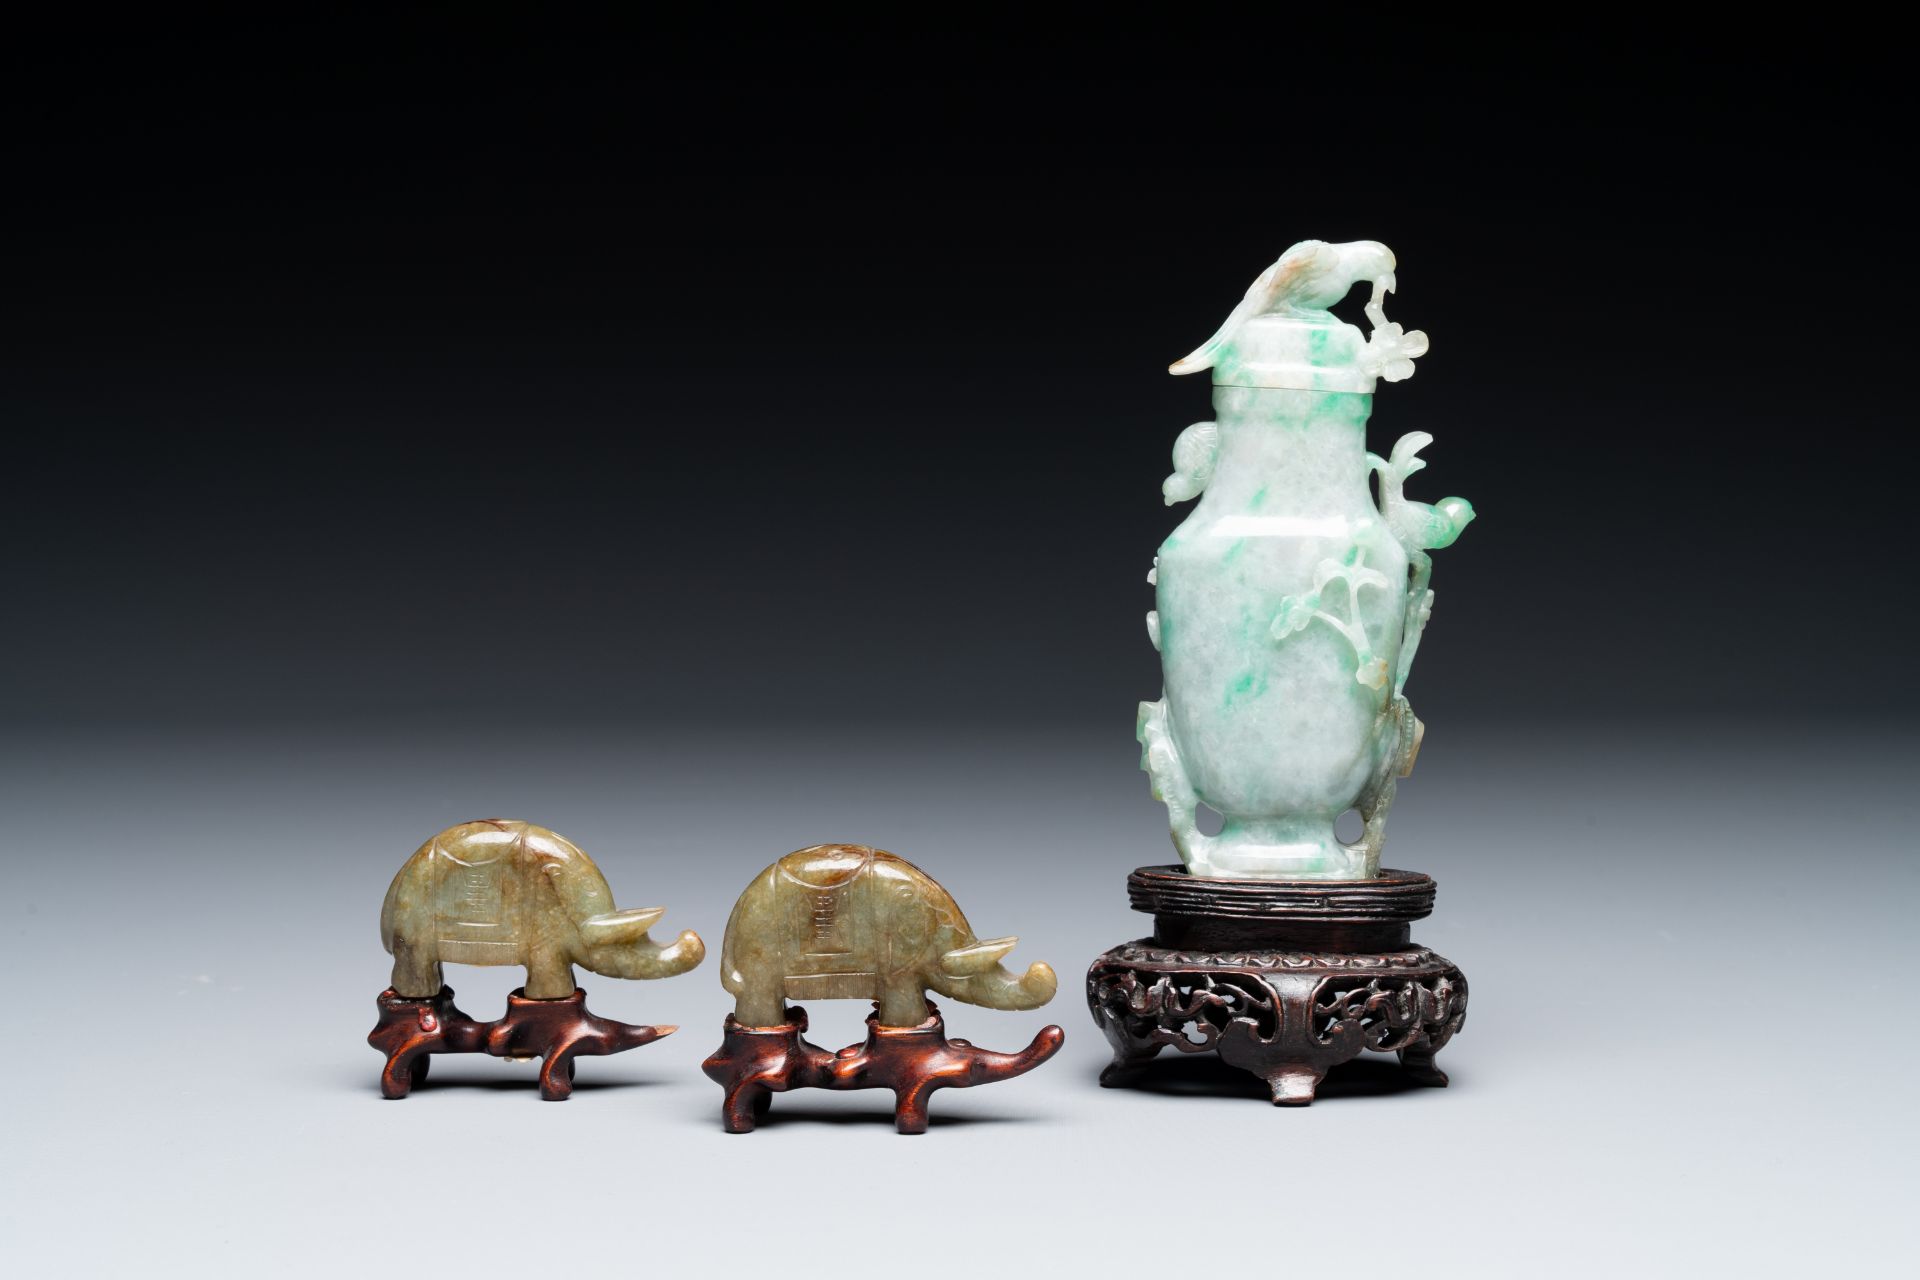 A pair of Chinese jade sculptures of elephants and a lidded vase on wooden stands, 19th C. - Image 3 of 5